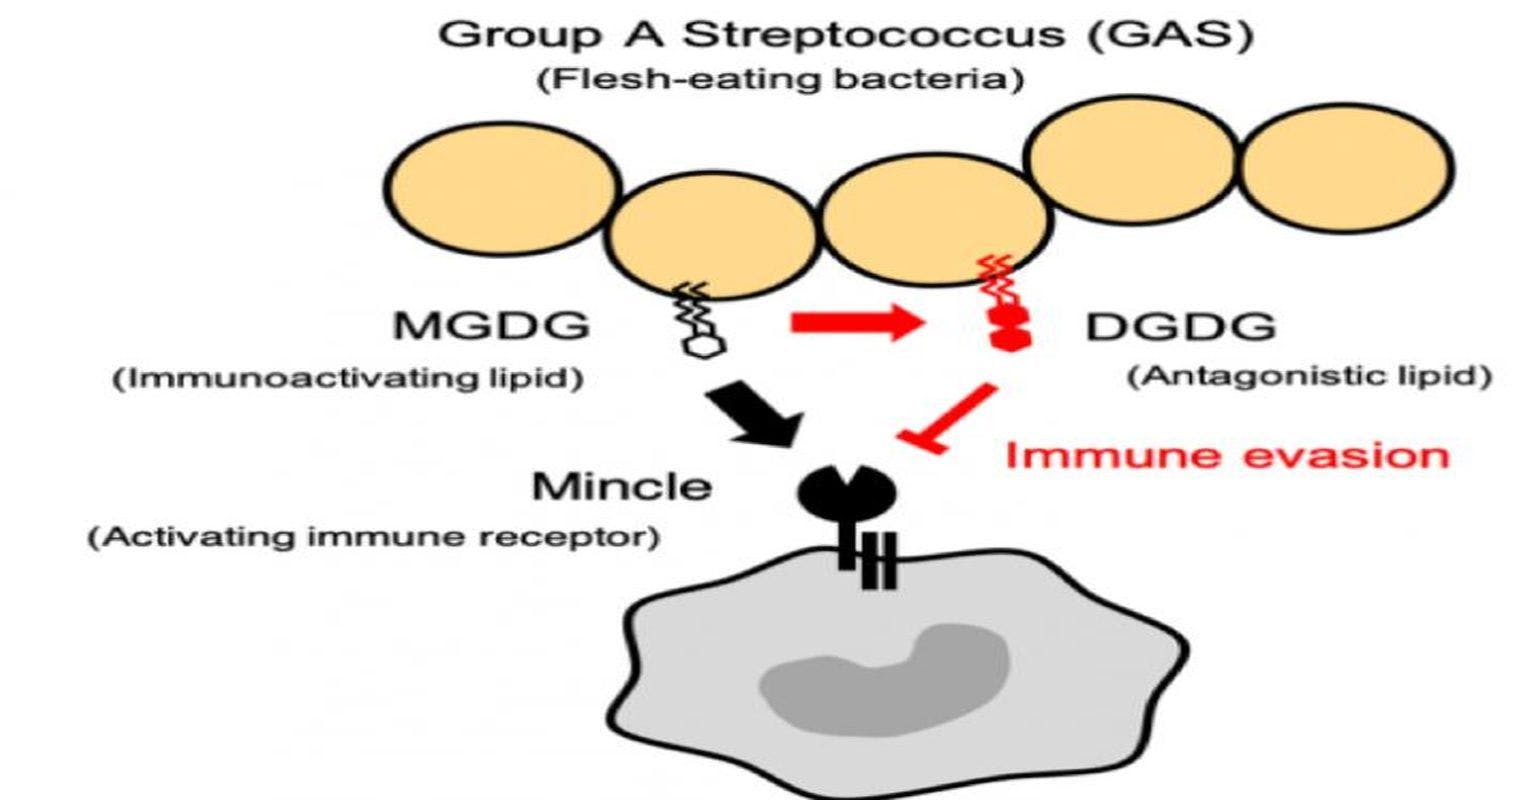 Mincle Receptor Provides Protective Immunity Against Group A Streptococcus